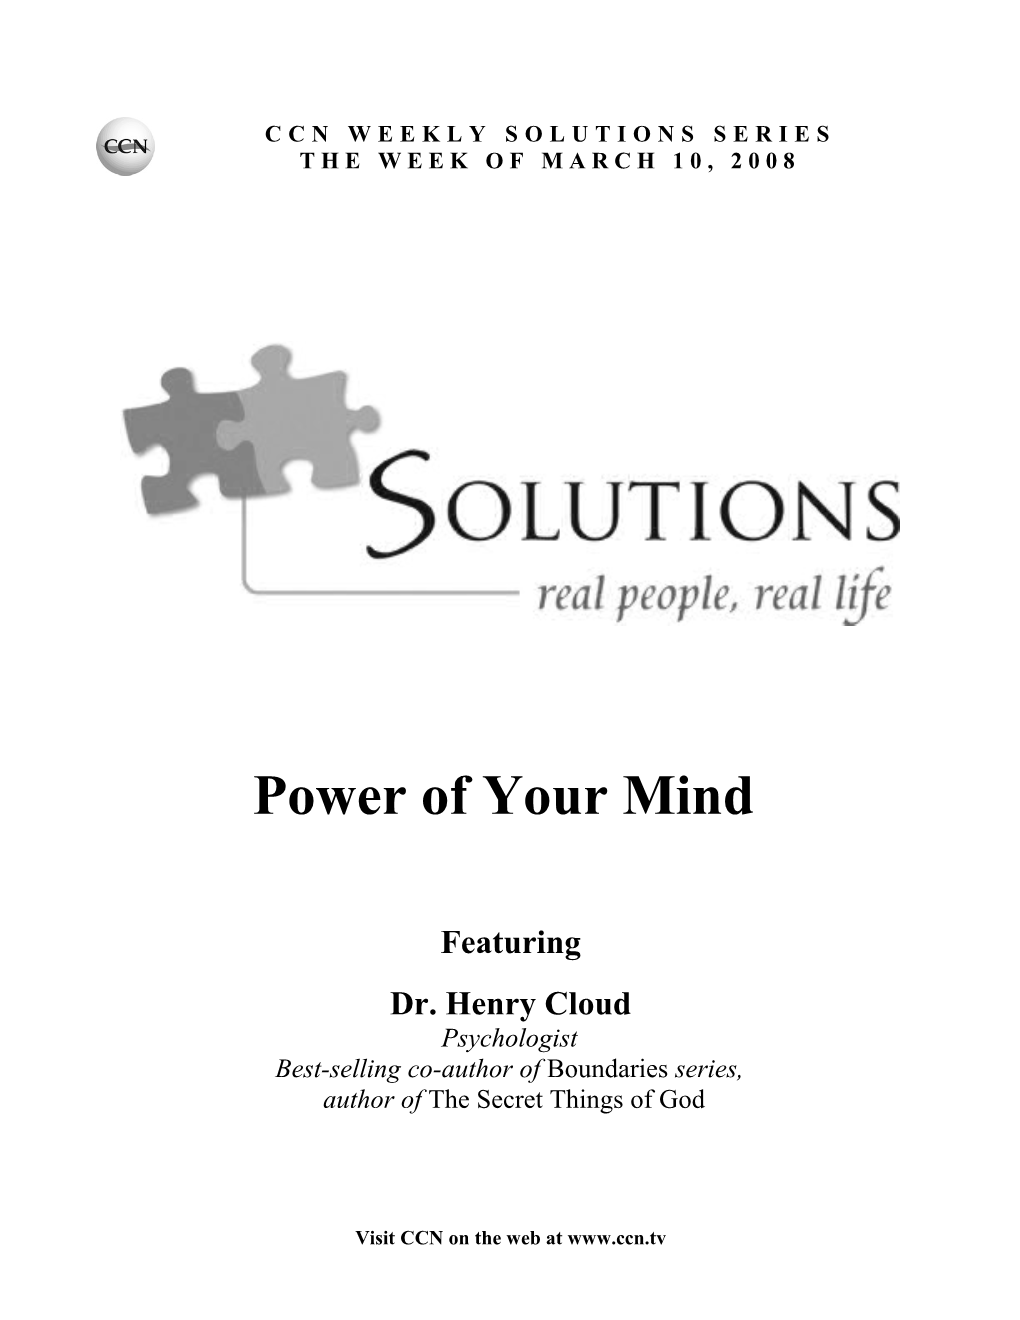 CCN Solutions: Power of Your Mind Page 2